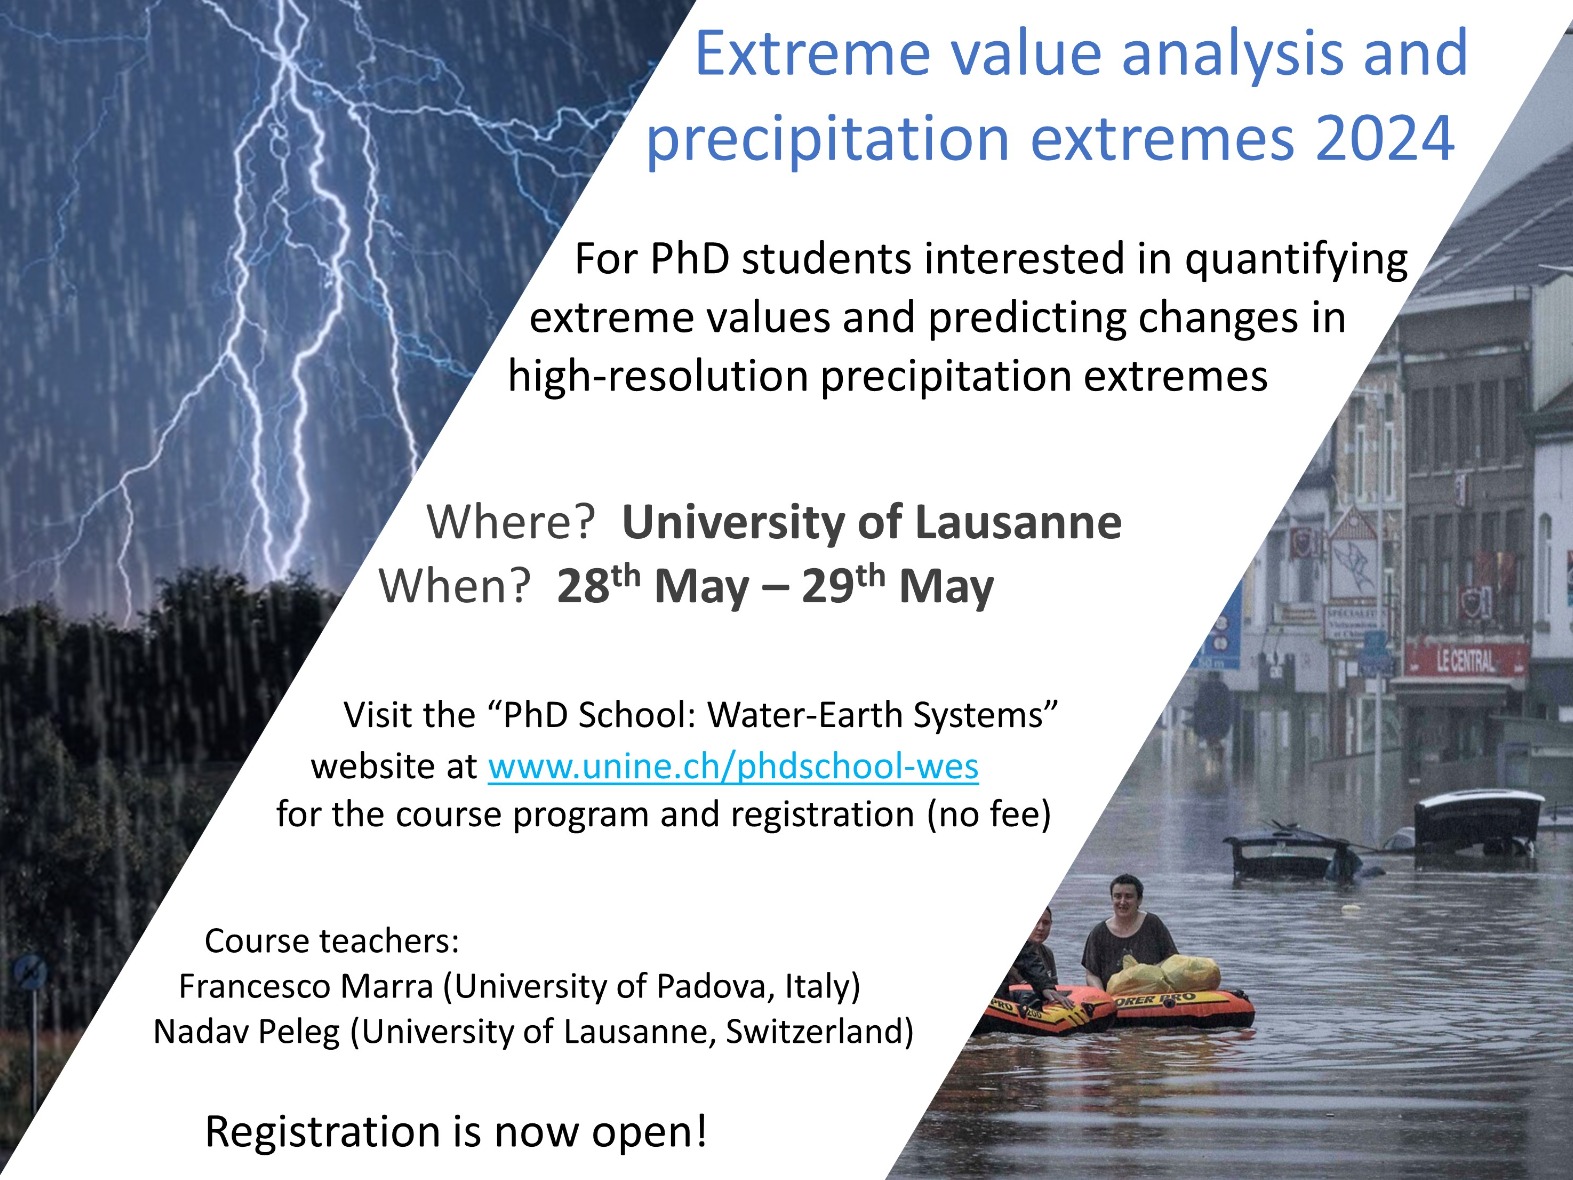 Water-Earth Systems PhD School Course: Extreme value analysis and precipitation extremes